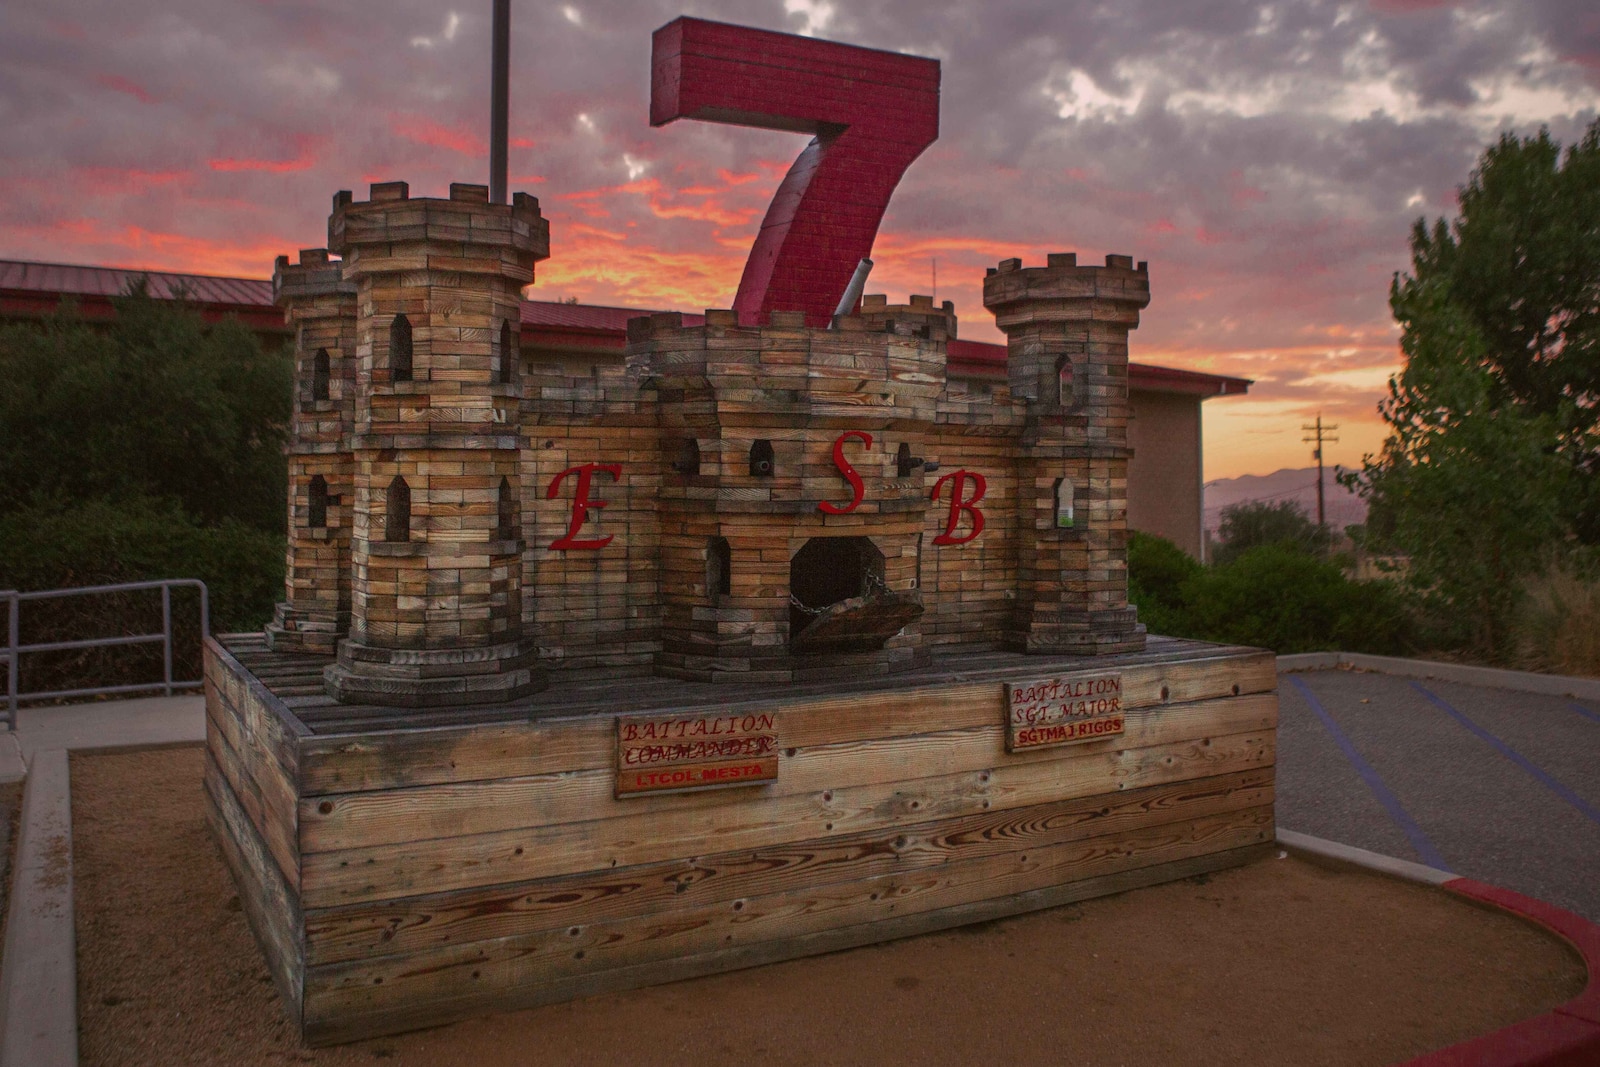 The 7th Engineer Support Battalion castle stands tall as the sun sets